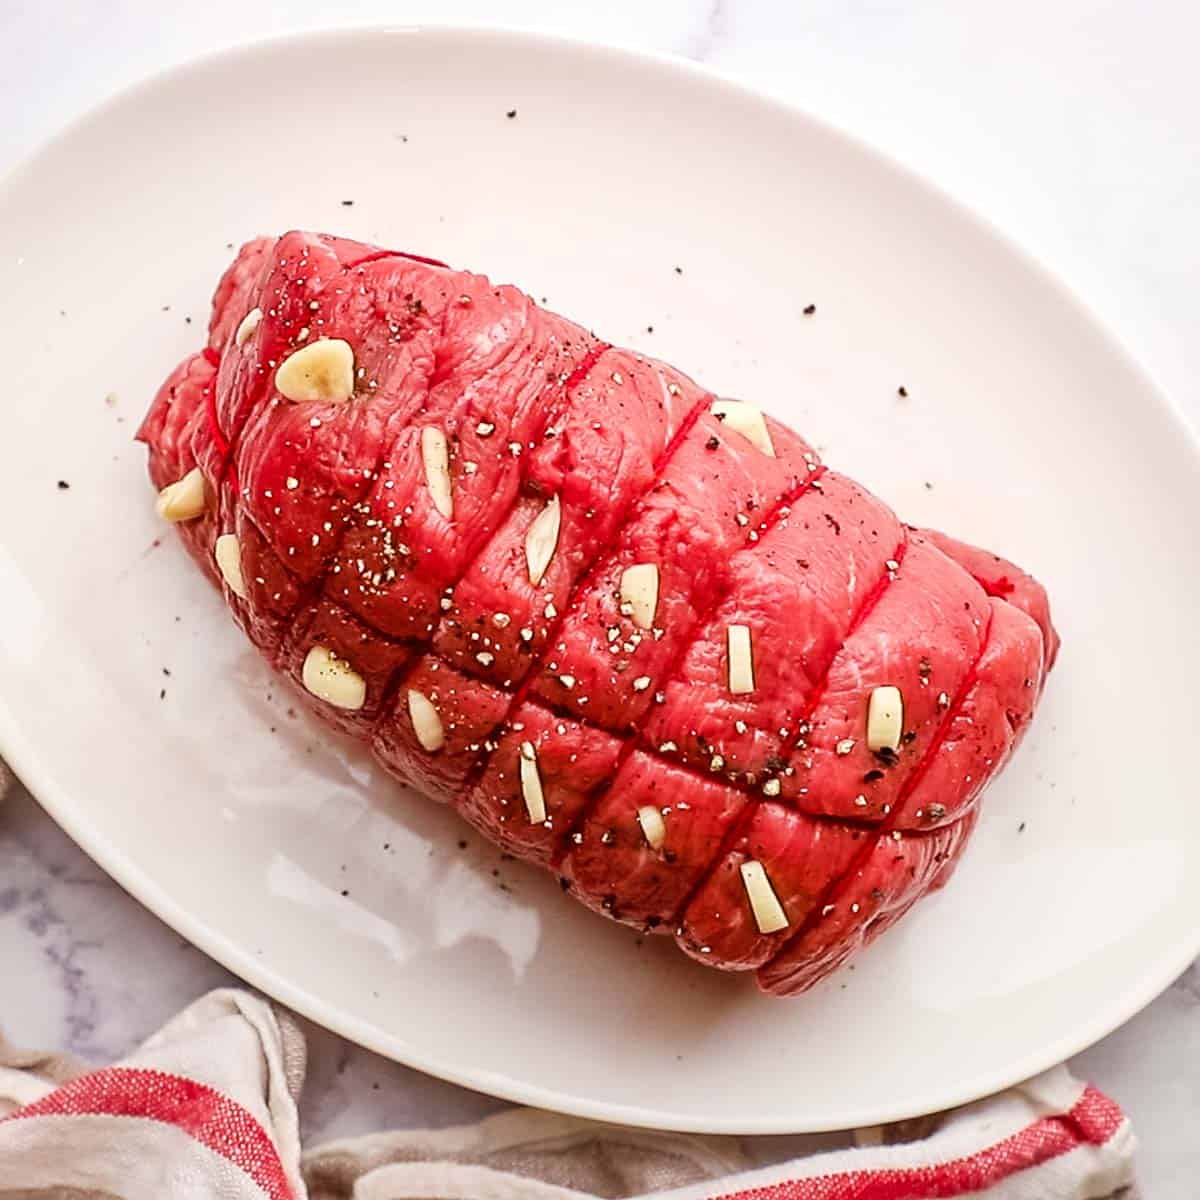 garlic stuffed in slits of a roast beef placed on a dish